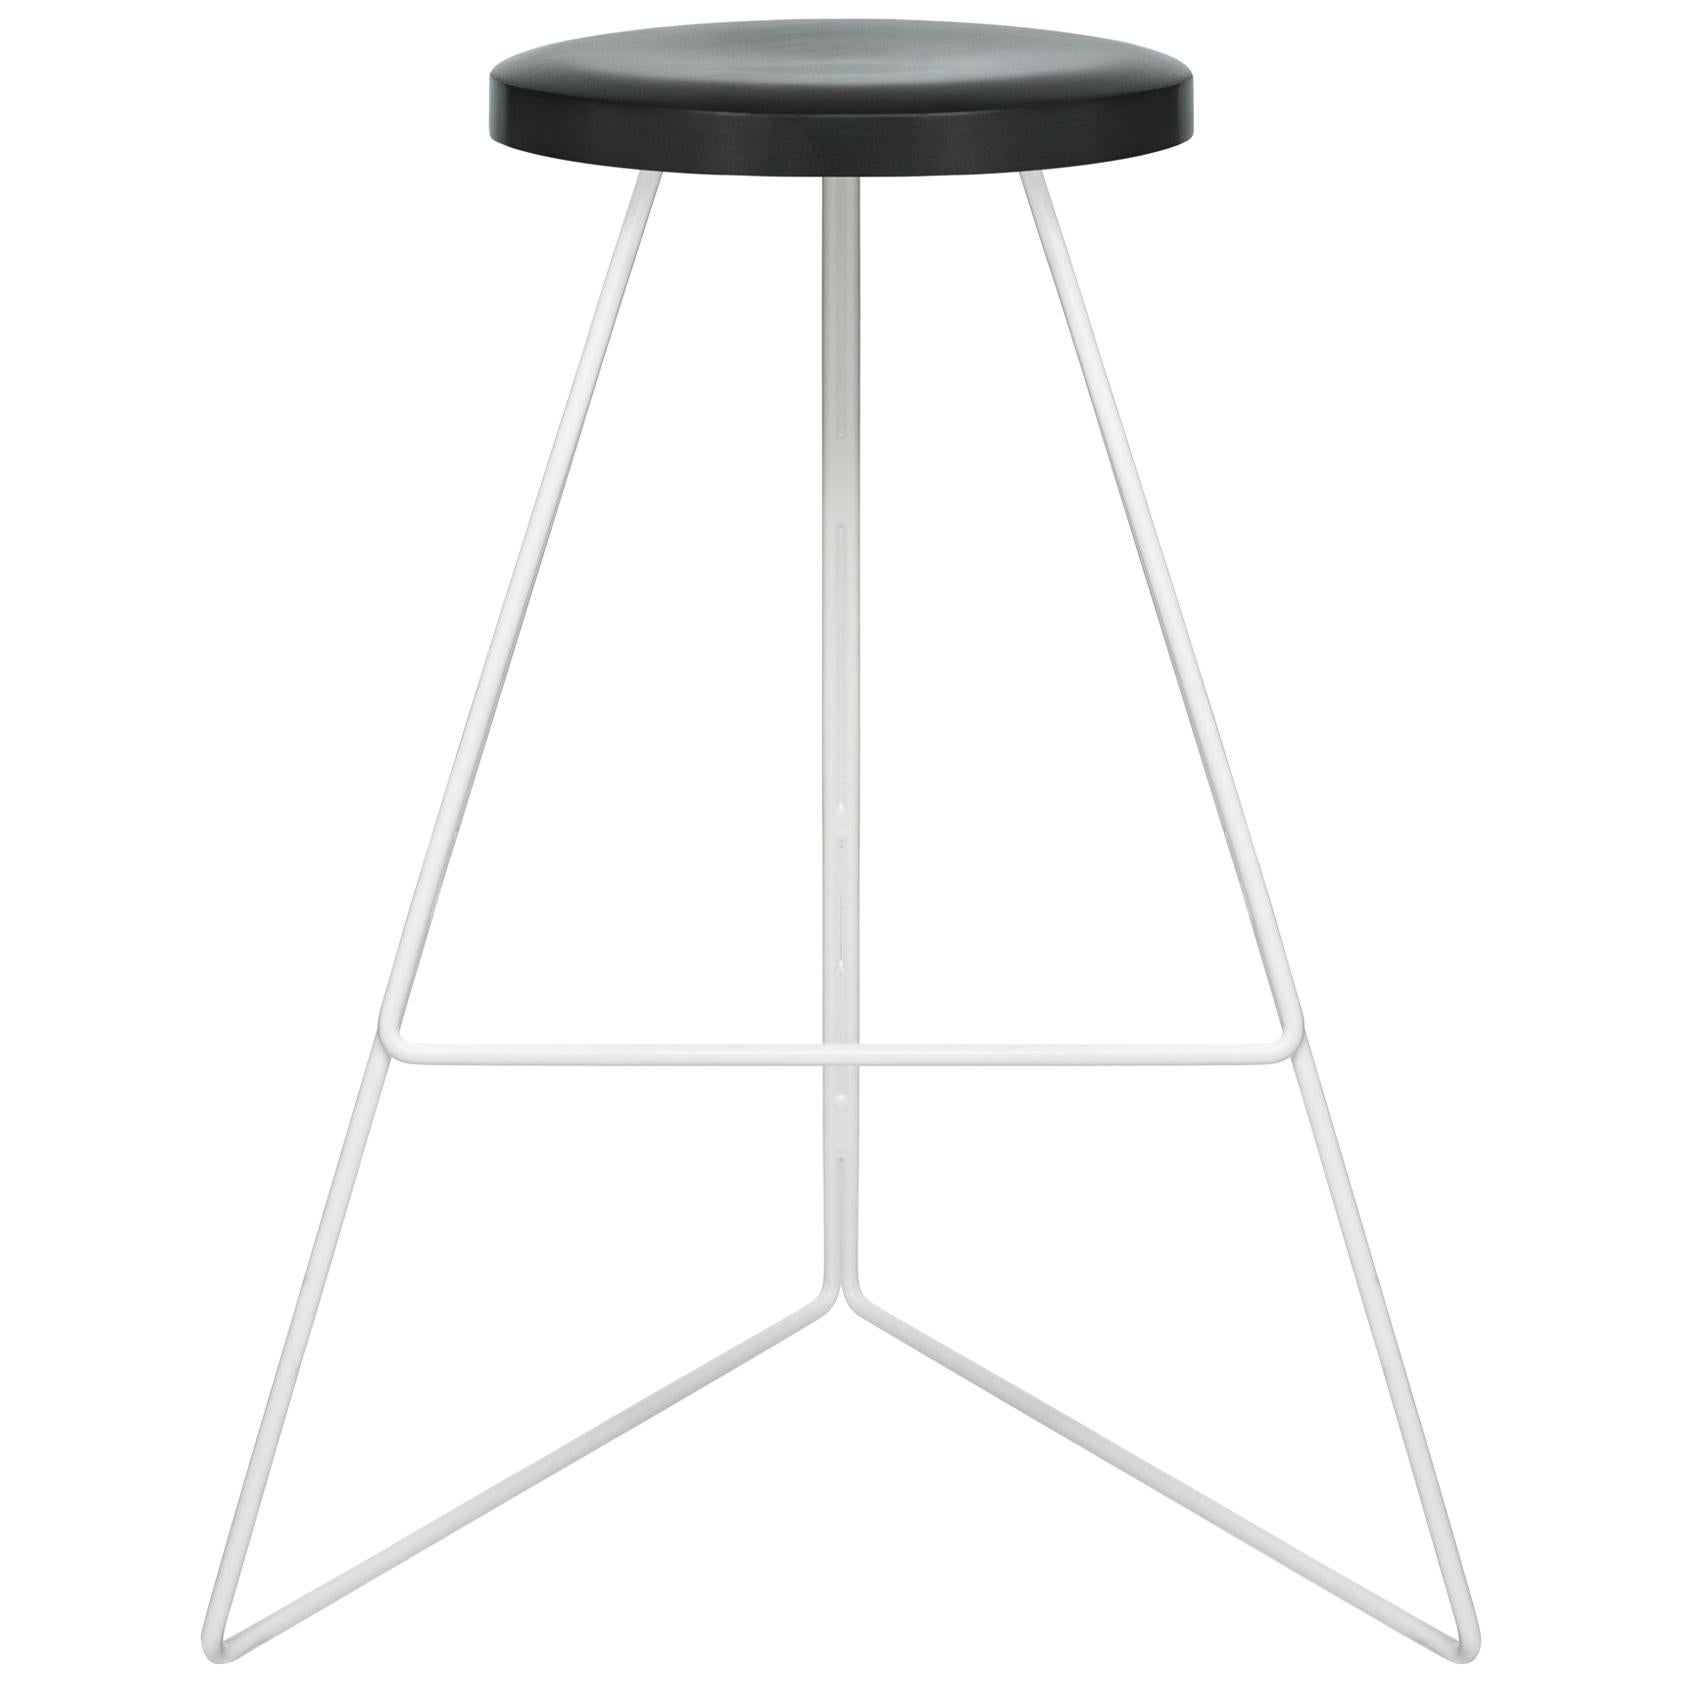 Coleman Stool, White and Charcoal, Counter Height For Sale